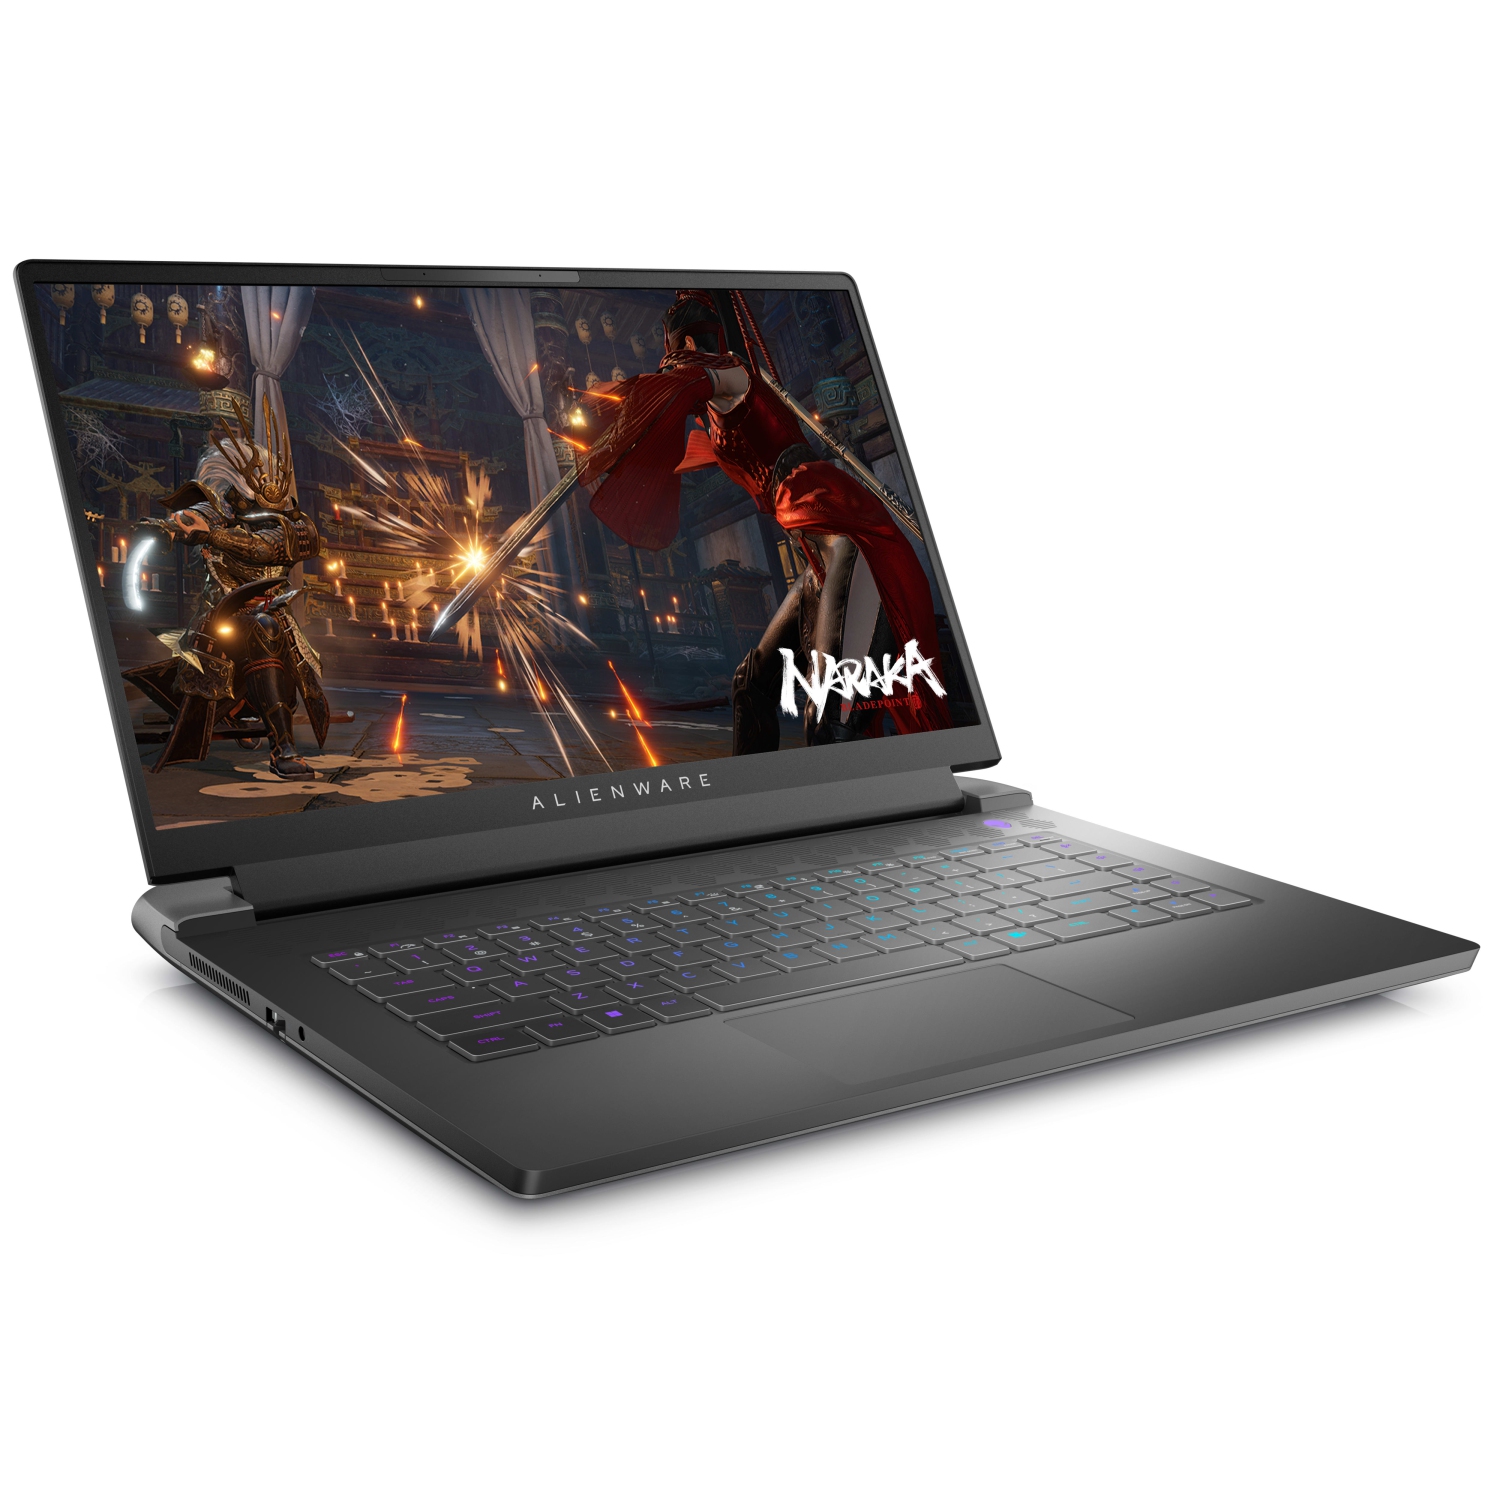 Refurbished (Excellent) – Dell Alienware m15 R7 Gaming Laptop (2022) | 15.6" FHD | Core i9 - 2TB SSD - 64GB RAM - RTX 3080 | 14 Cores @ 5 GHz - 12th Gen CPU - 8GB GDDR6X